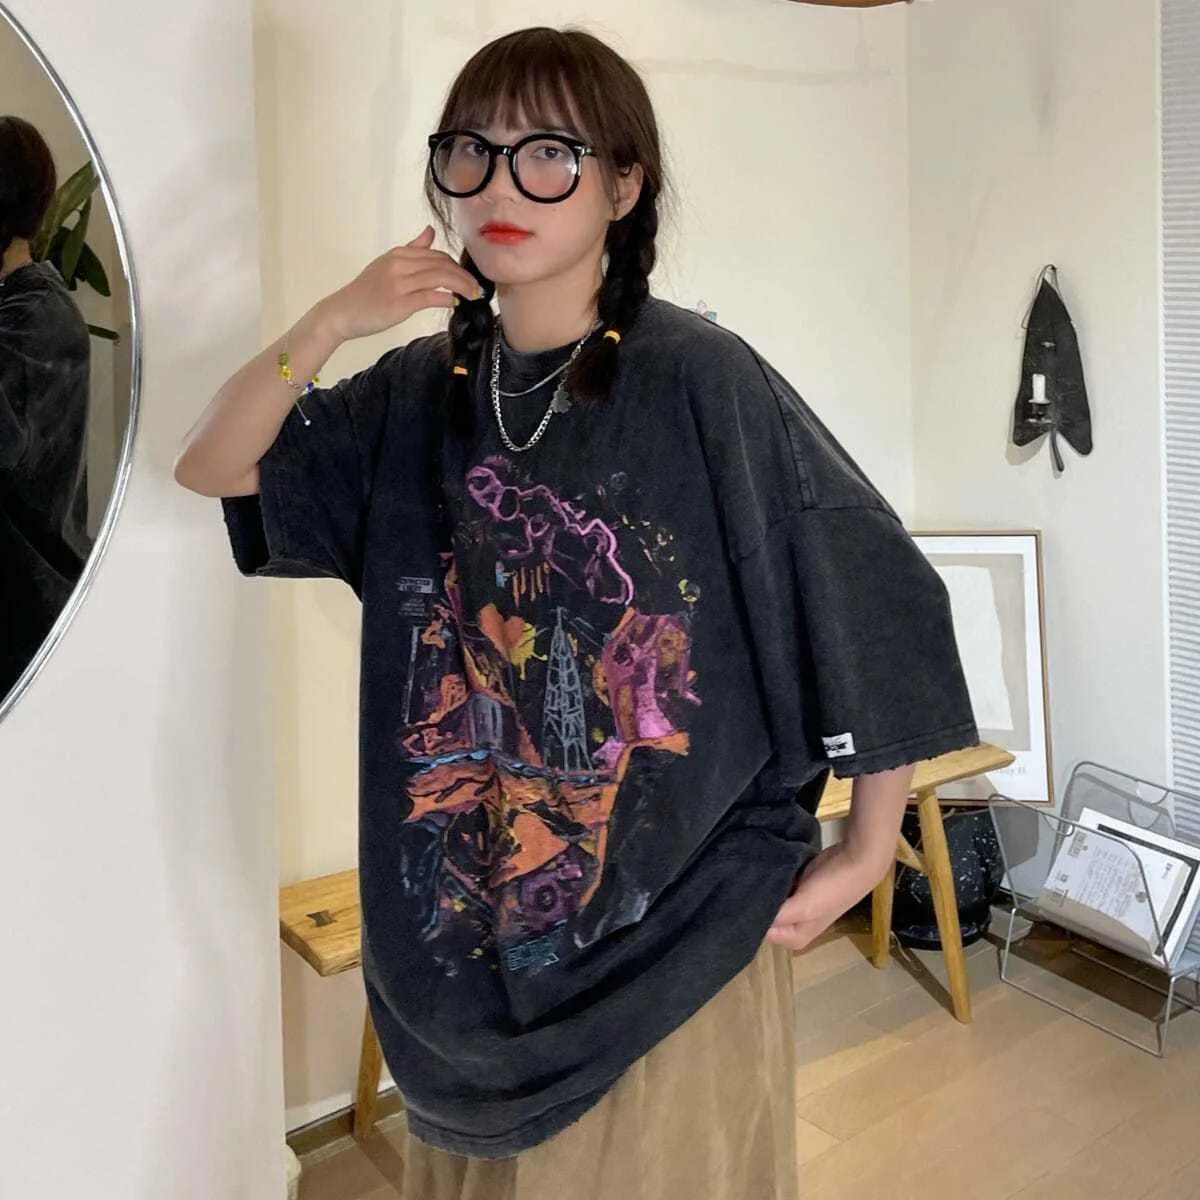 Oversized T Shirt Short Sleeve Oversize Street Hip Hop O-Neck Goth Casual Harajuku Grunge Y2k Top Tees Sweaters Vintage Clothing cute summer crop tops Tees